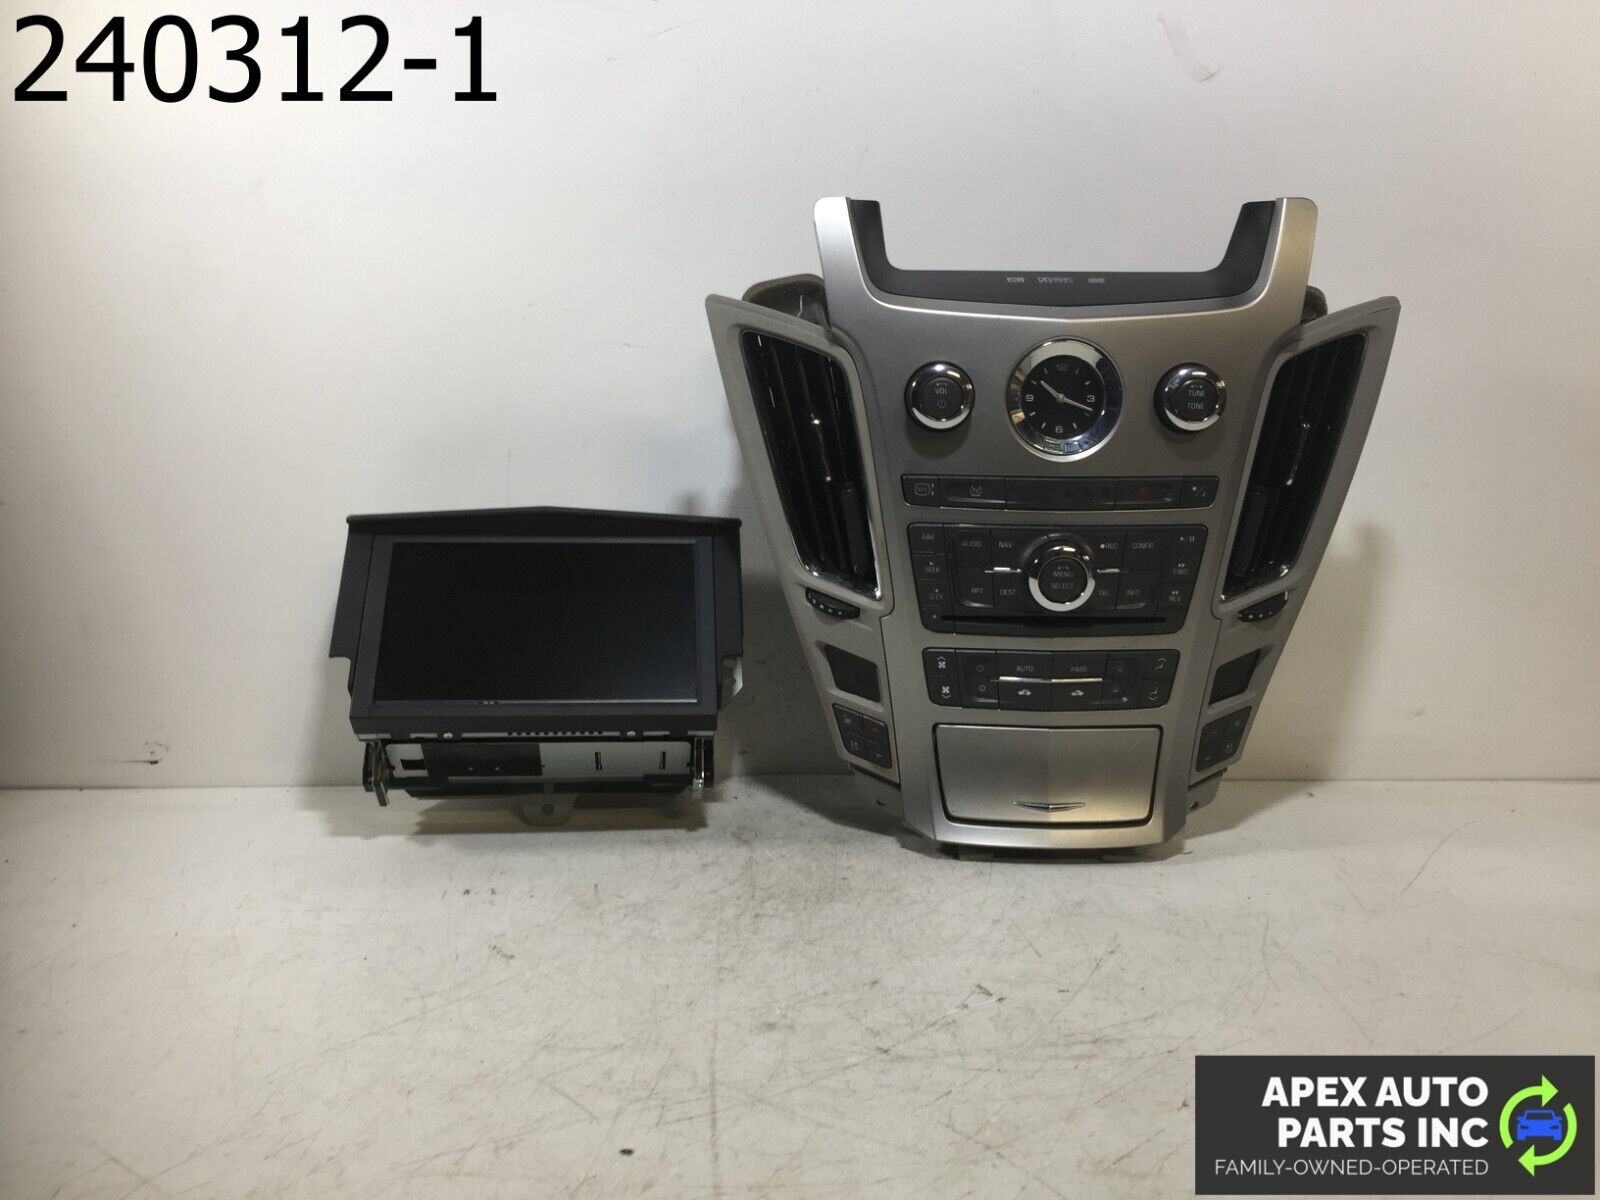 OEM 2010 Cadillac CTS Climate Control XM Radio CD AUX Player Panel 25960565